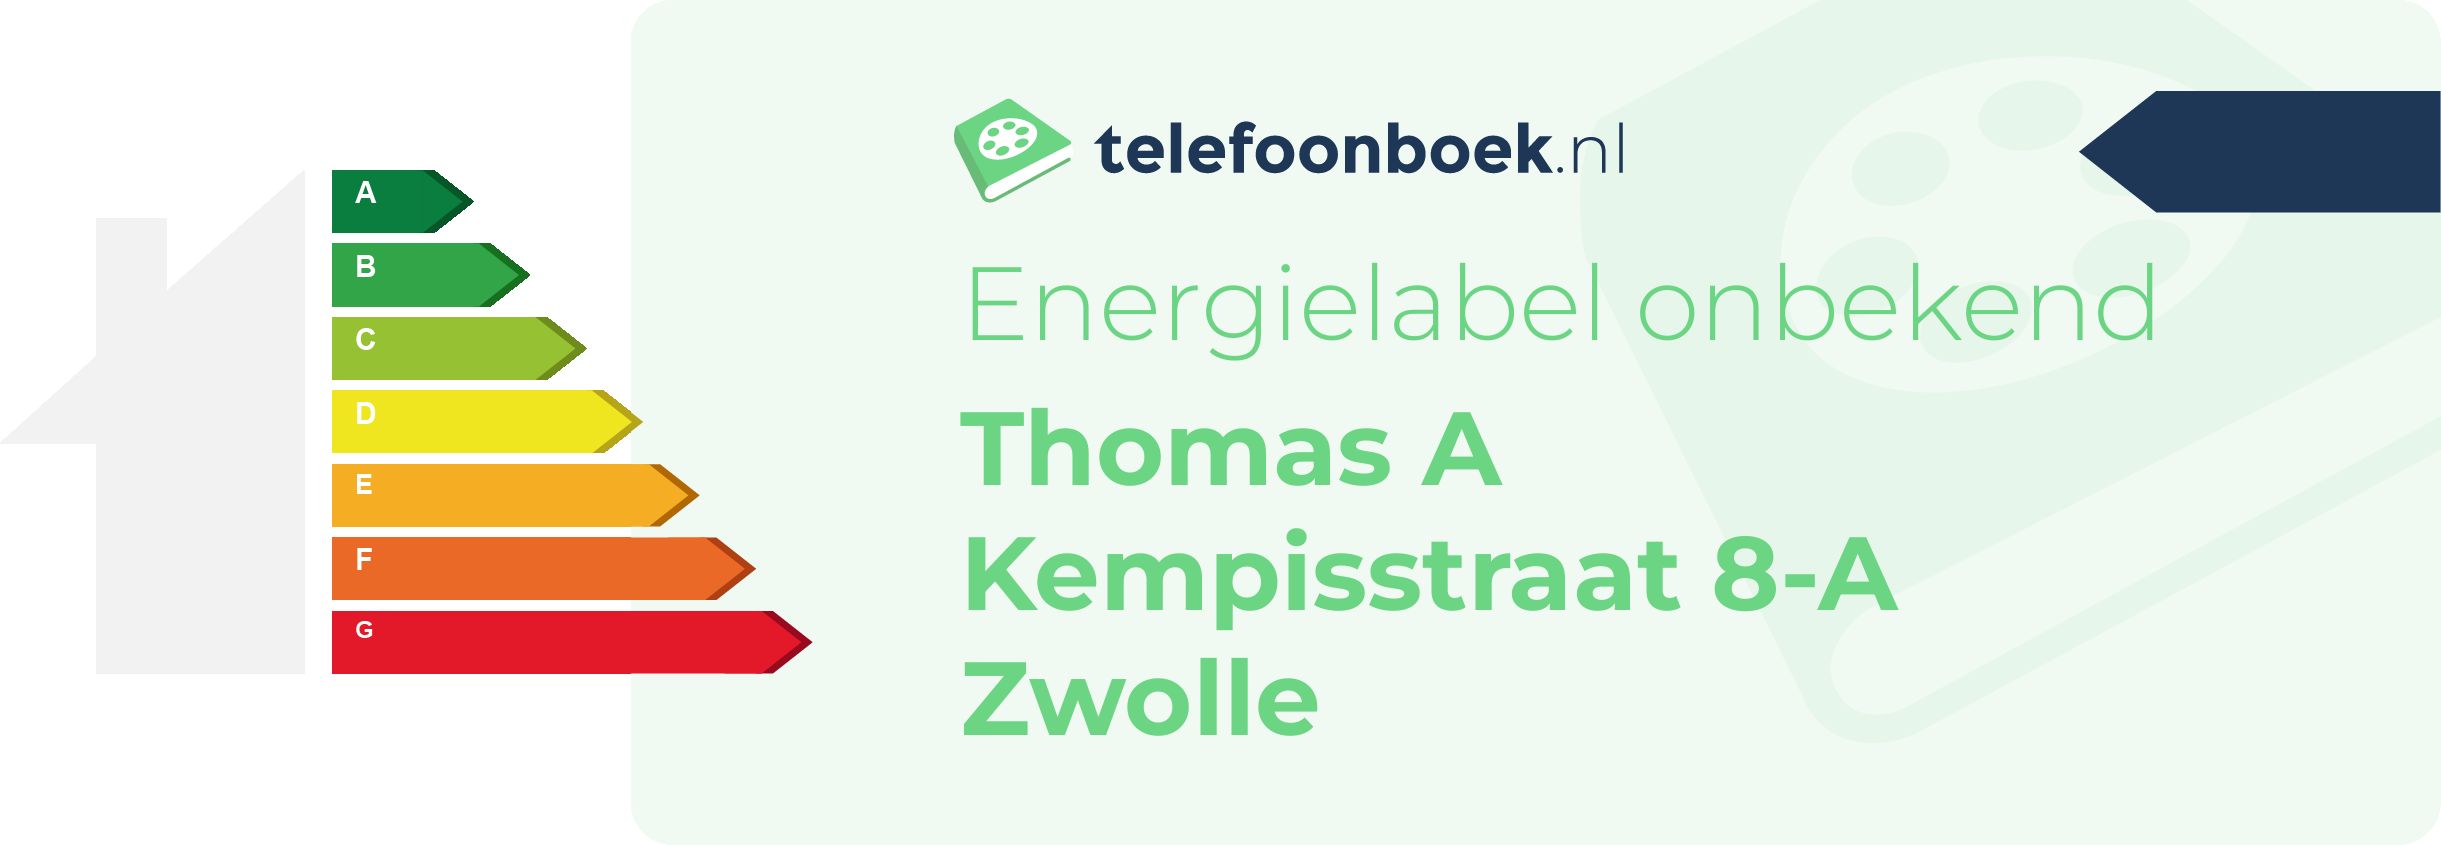 Energielabel Thomas A Kempisstraat 8-A Zwolle